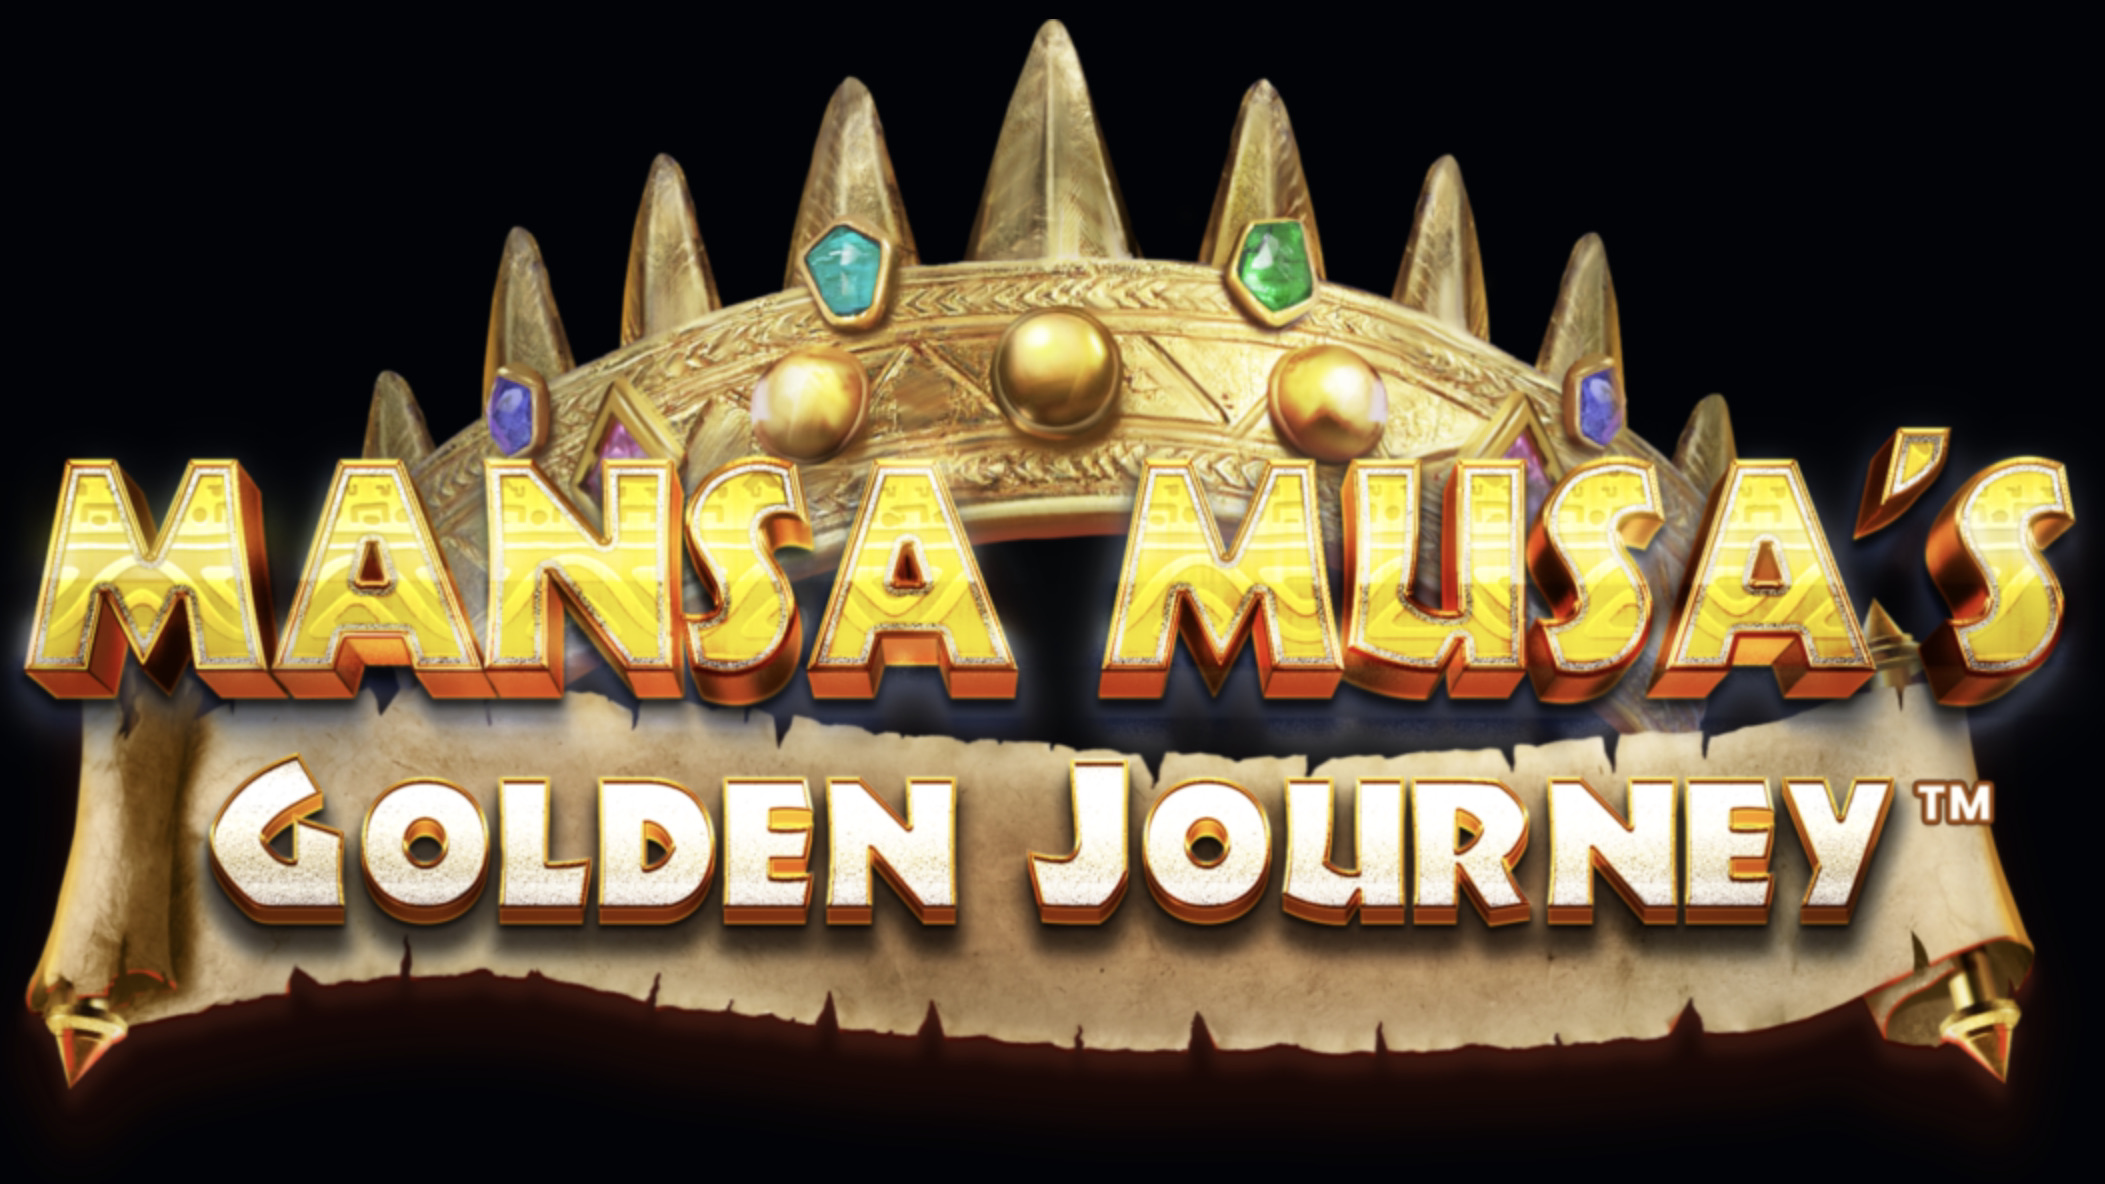 Mansa Musa’s Golden Journey is a 5x5, 3,125-payline video slot that incorporates a Mansa Musa’s stamp feature.